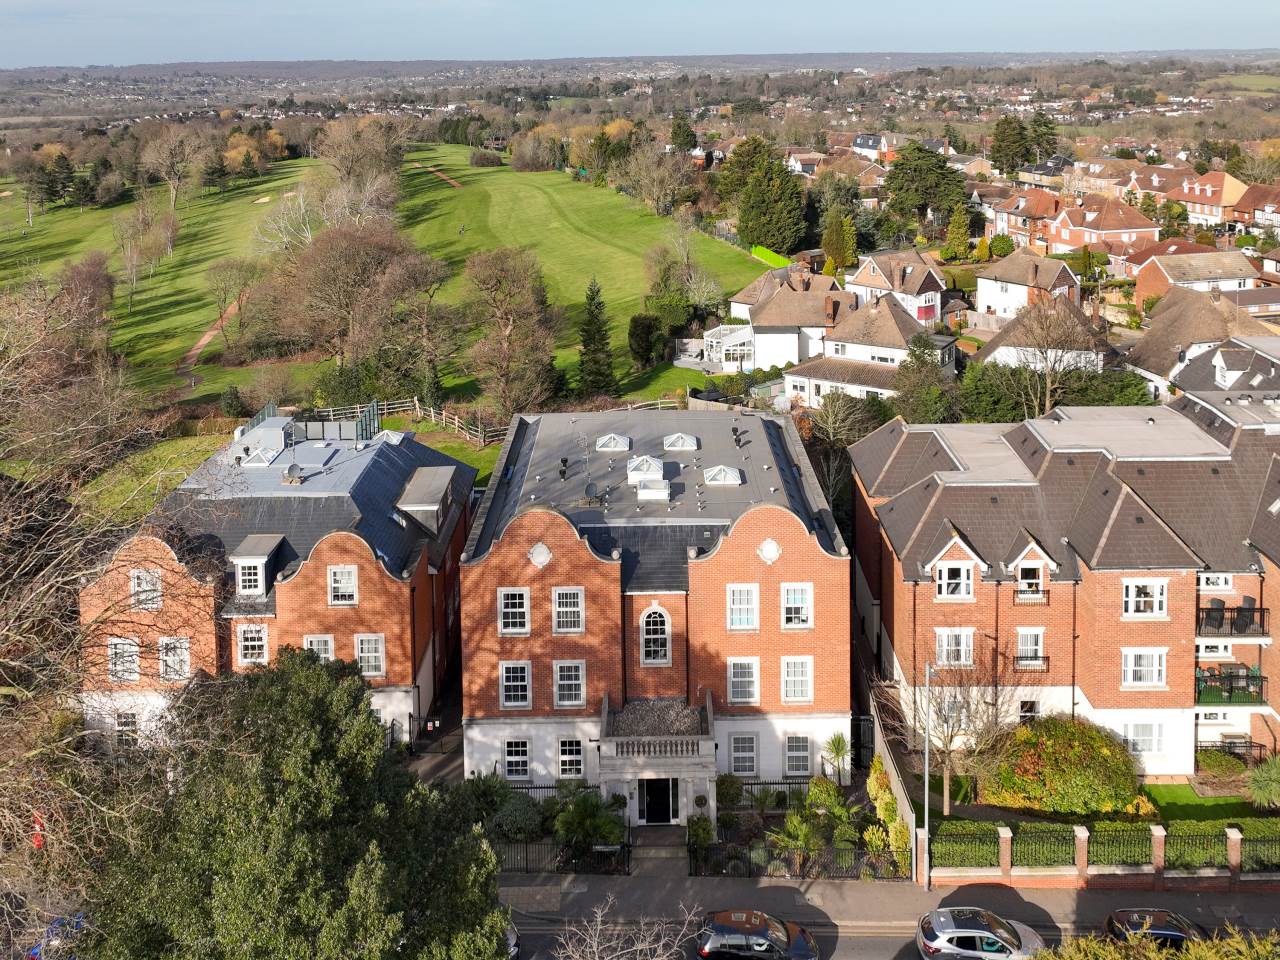 As the seller’s sole agents, we are delighted to offer for sale this beautifully presented first floor apartment located on the very sought after Manor Road, Chigwell and backing on to Chigwell golf course. Accommodation is extremely spacious throughout and measures just over 1400 sq. ft. Entry is through a beautifully presented communal entrance hall with stairs and a lift to all floors.The apartment boasts a beautifully presented entrance hall leading to three double bedrooms. The master bedroom. The lounge is bright and airy with access to the large terrace area which in turn offers superb views directly over Chigwell golf course. The kitchen is beautifully presented with a superb range of base and wall units and a range of Miele appliances and space for a large dining table. In addition to the two en suites, there is a large family bathroom which is beautifully presented. The apartment comes with two allocated underground parking spacing as well as a storage shed which is located in the parking area and both can be accessed directly from the lift. Additional features include, under floor heating throughout, ample storage and a share of the freehold. The service charge is approx., £3800 per annum.The location is with easy reach of a number of local shops, bars, and restaurants and perfectly located for excellent transport links to Chigwell and Grange Hill Central Line stations. An internal inspection is strongly advised and offers in excess of £950,000 are invited.
